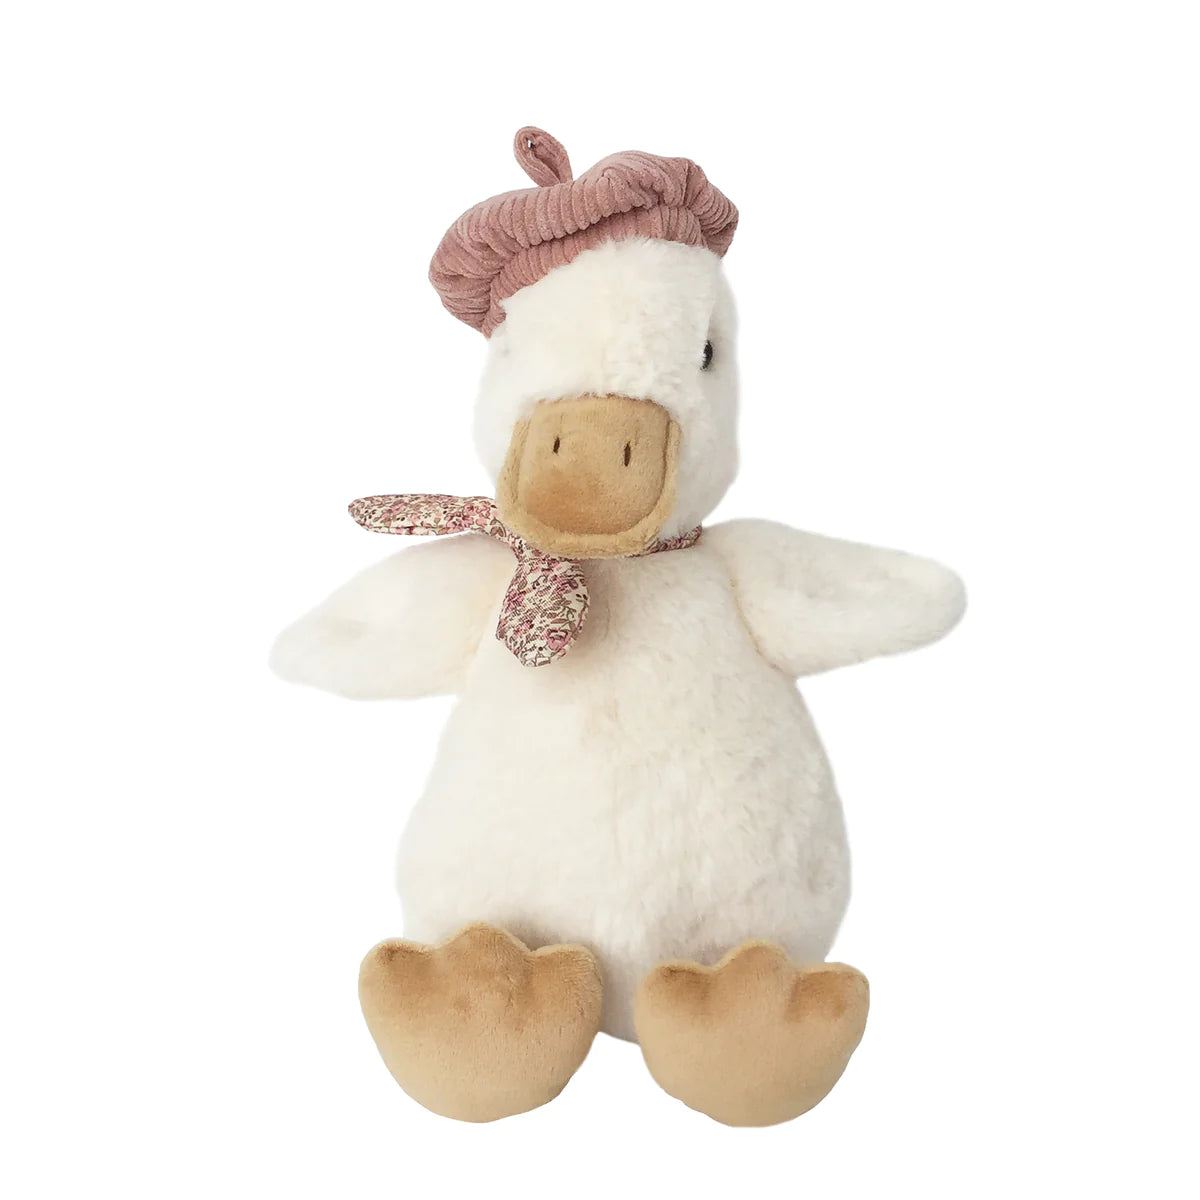 Colette the Duck Plush Toy - P I C N I C 